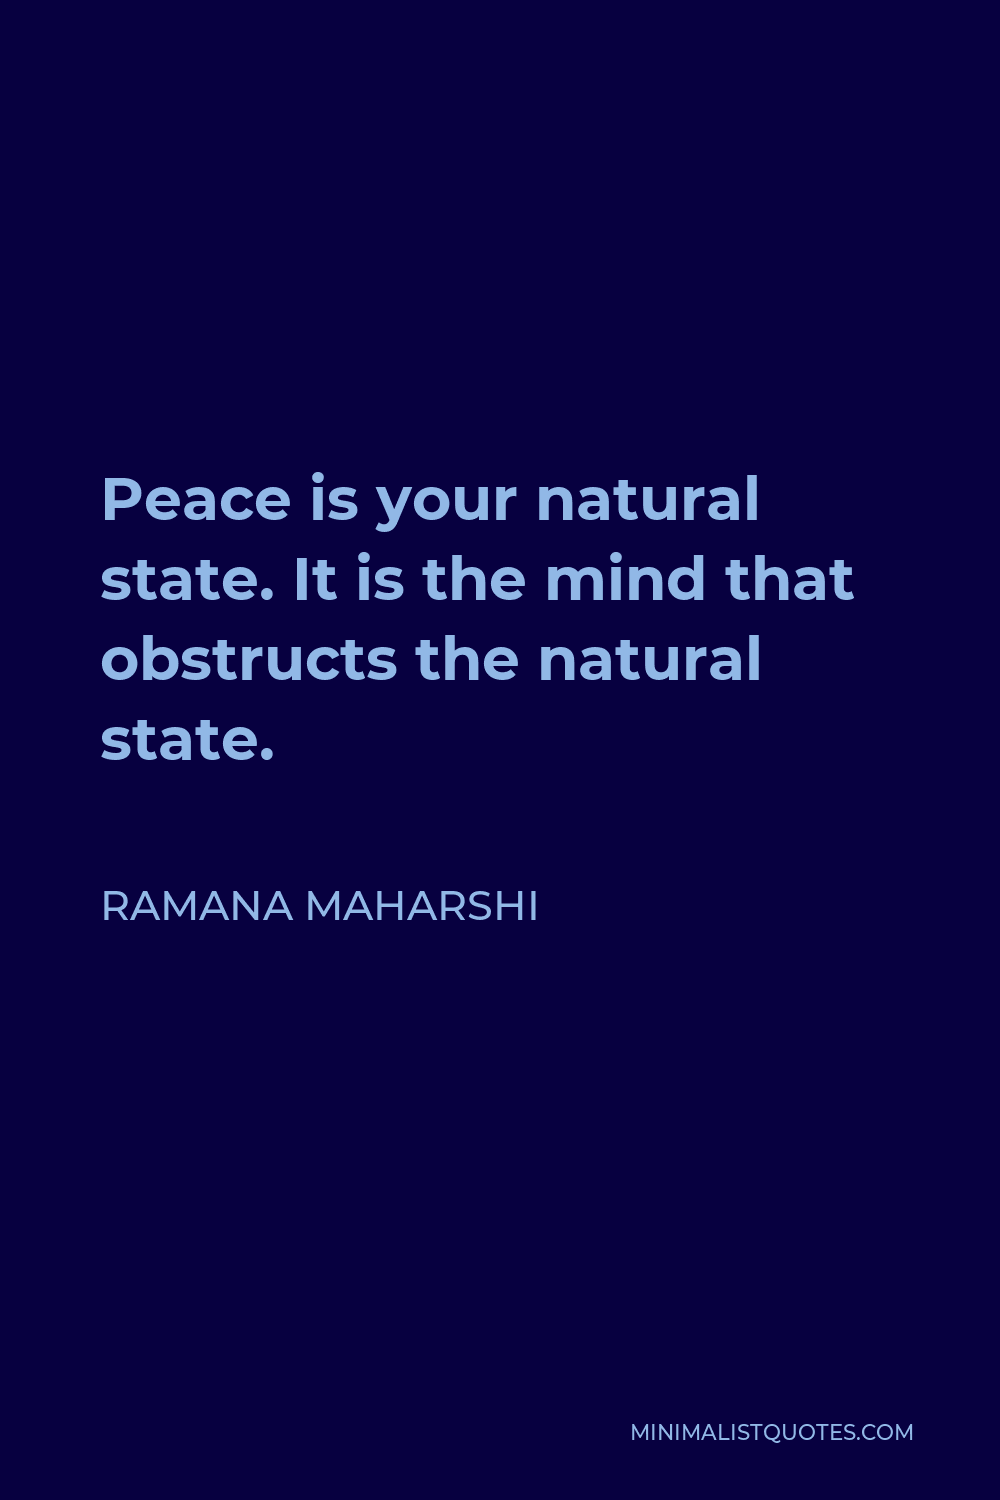 Ramana Maharshi Quote - Peace is your natural state. It is the mind that obstructs the natural state.